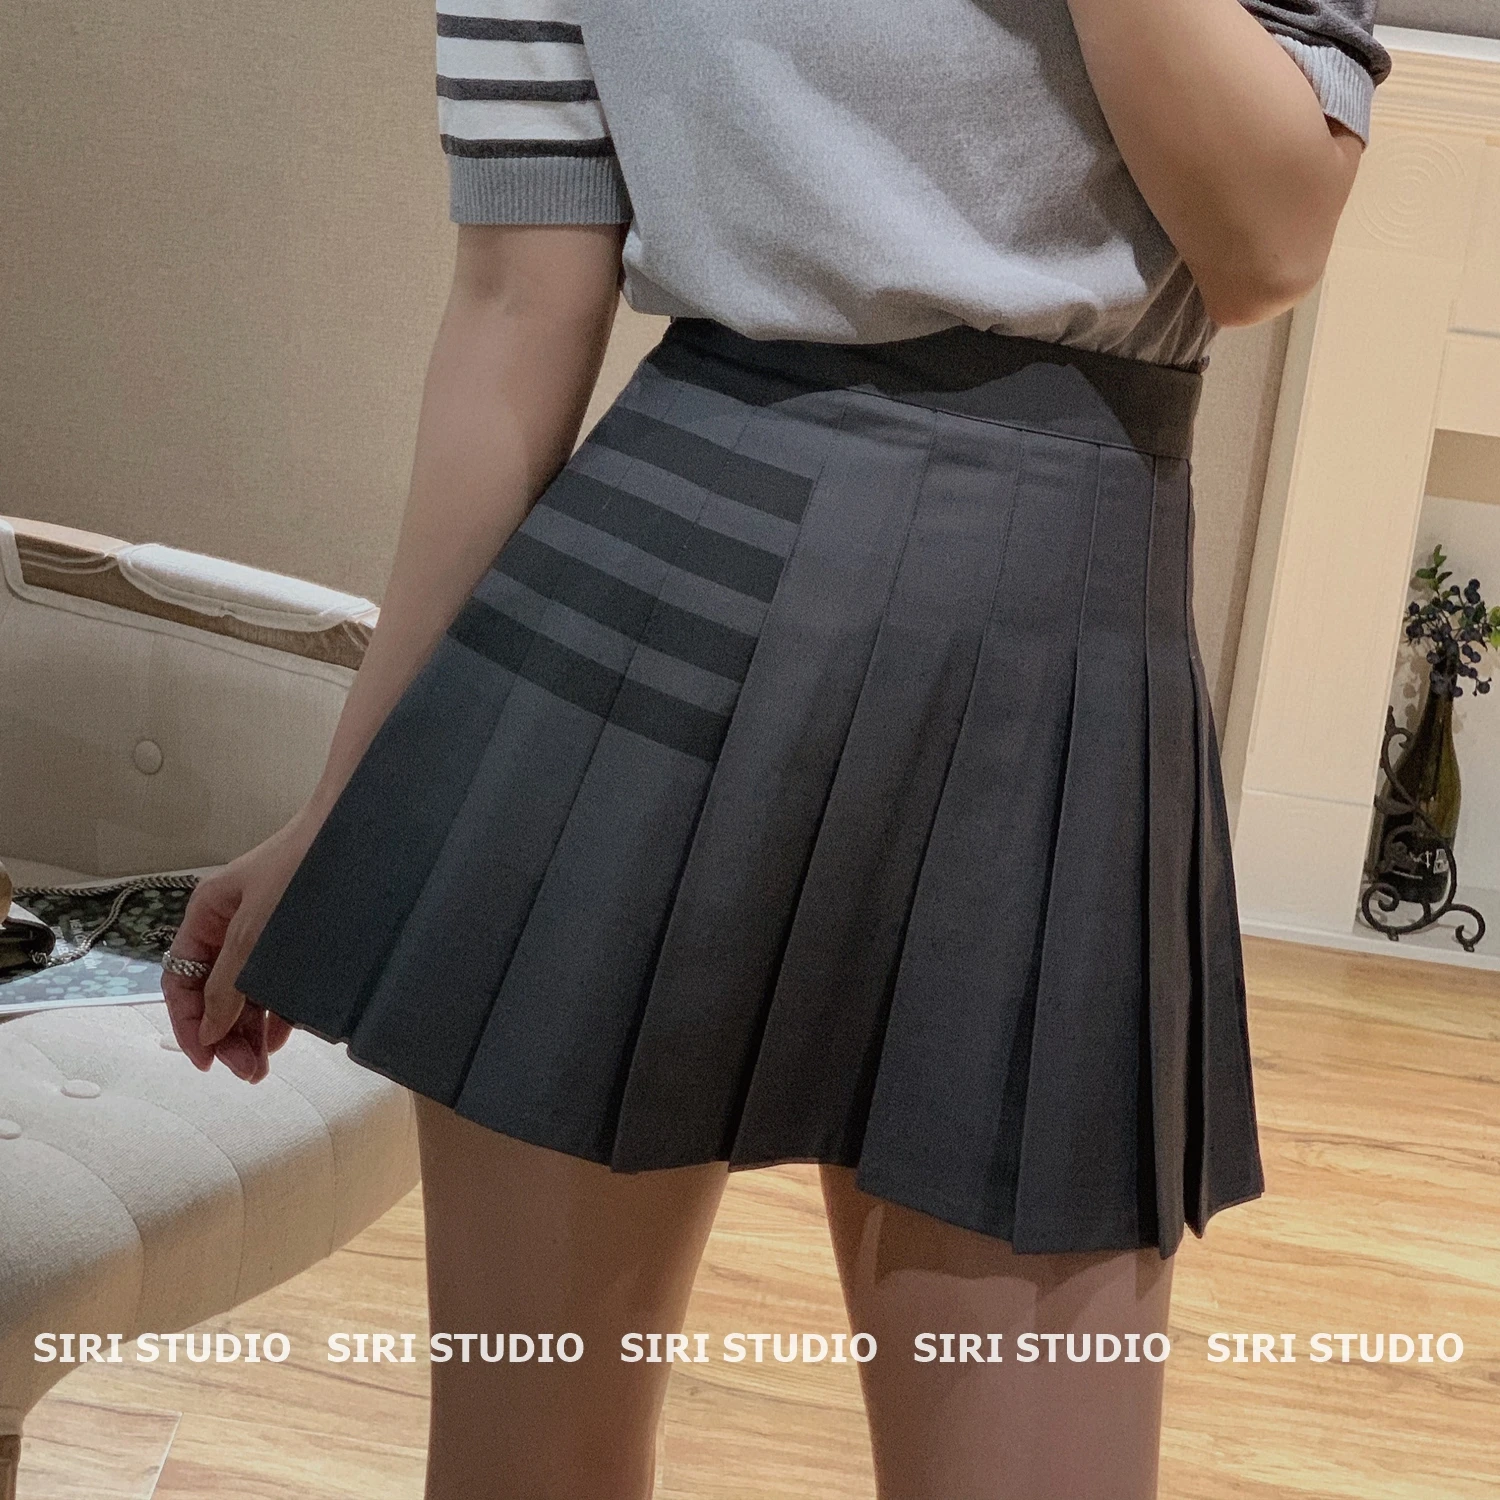 tb gray suit skirt high waist and thin A-line pleated skirt college style retro four-bar striped short skirt skirt women retro women wax rope braided thin waist belt casual style fashion accessories waistband full matching dress shirt decorative bel